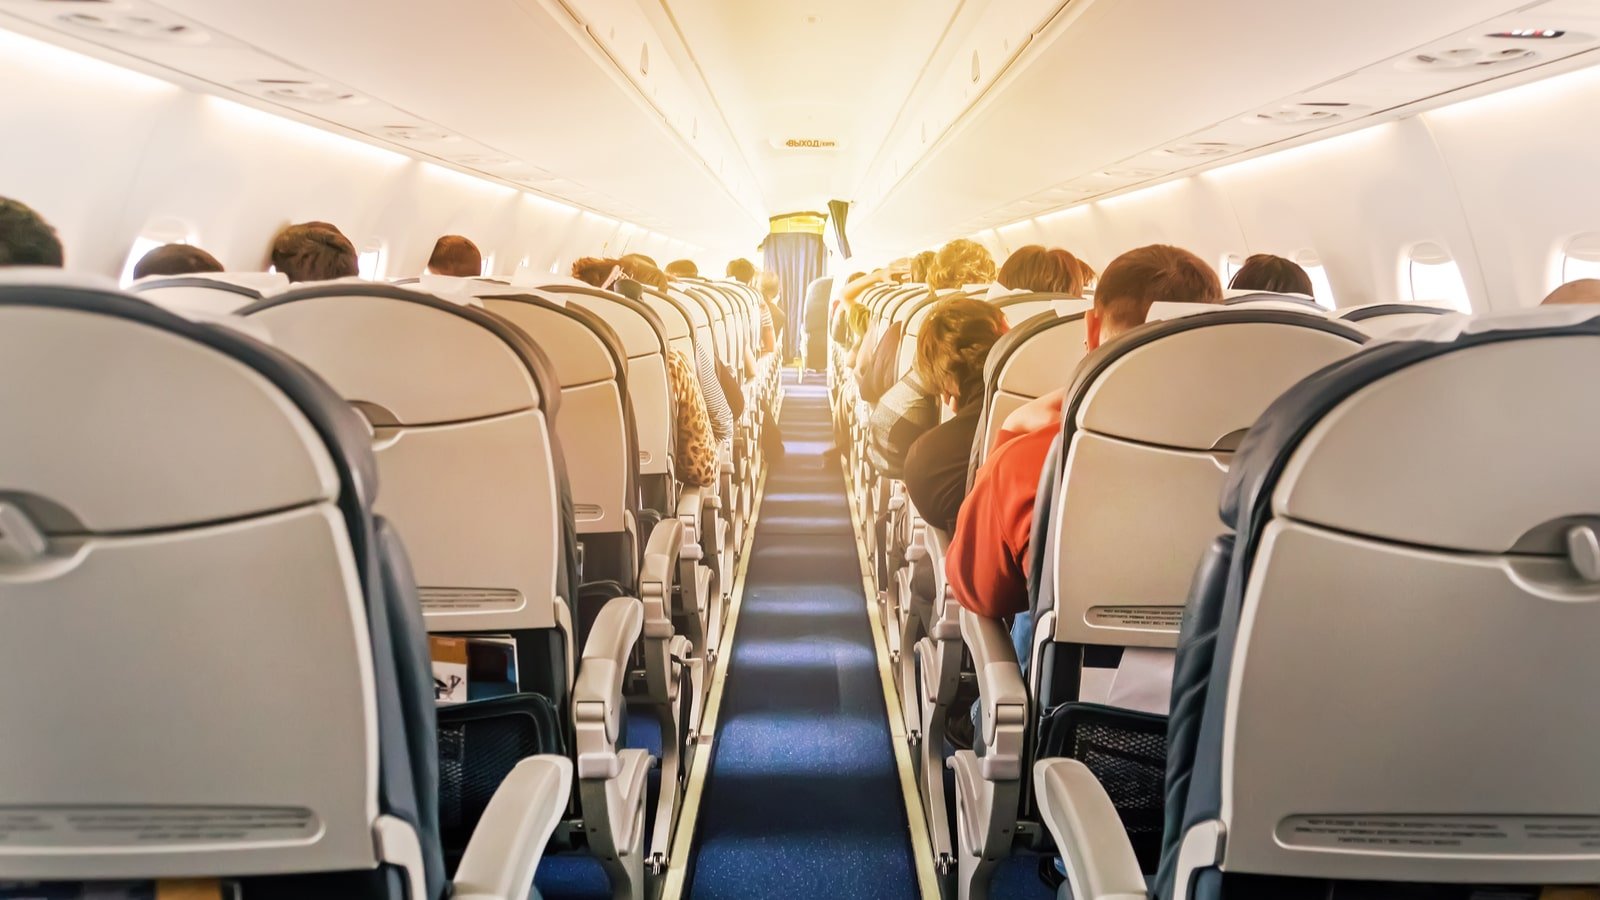 stock image of the interior of a passenger aircraft. Airline stocks are up again.